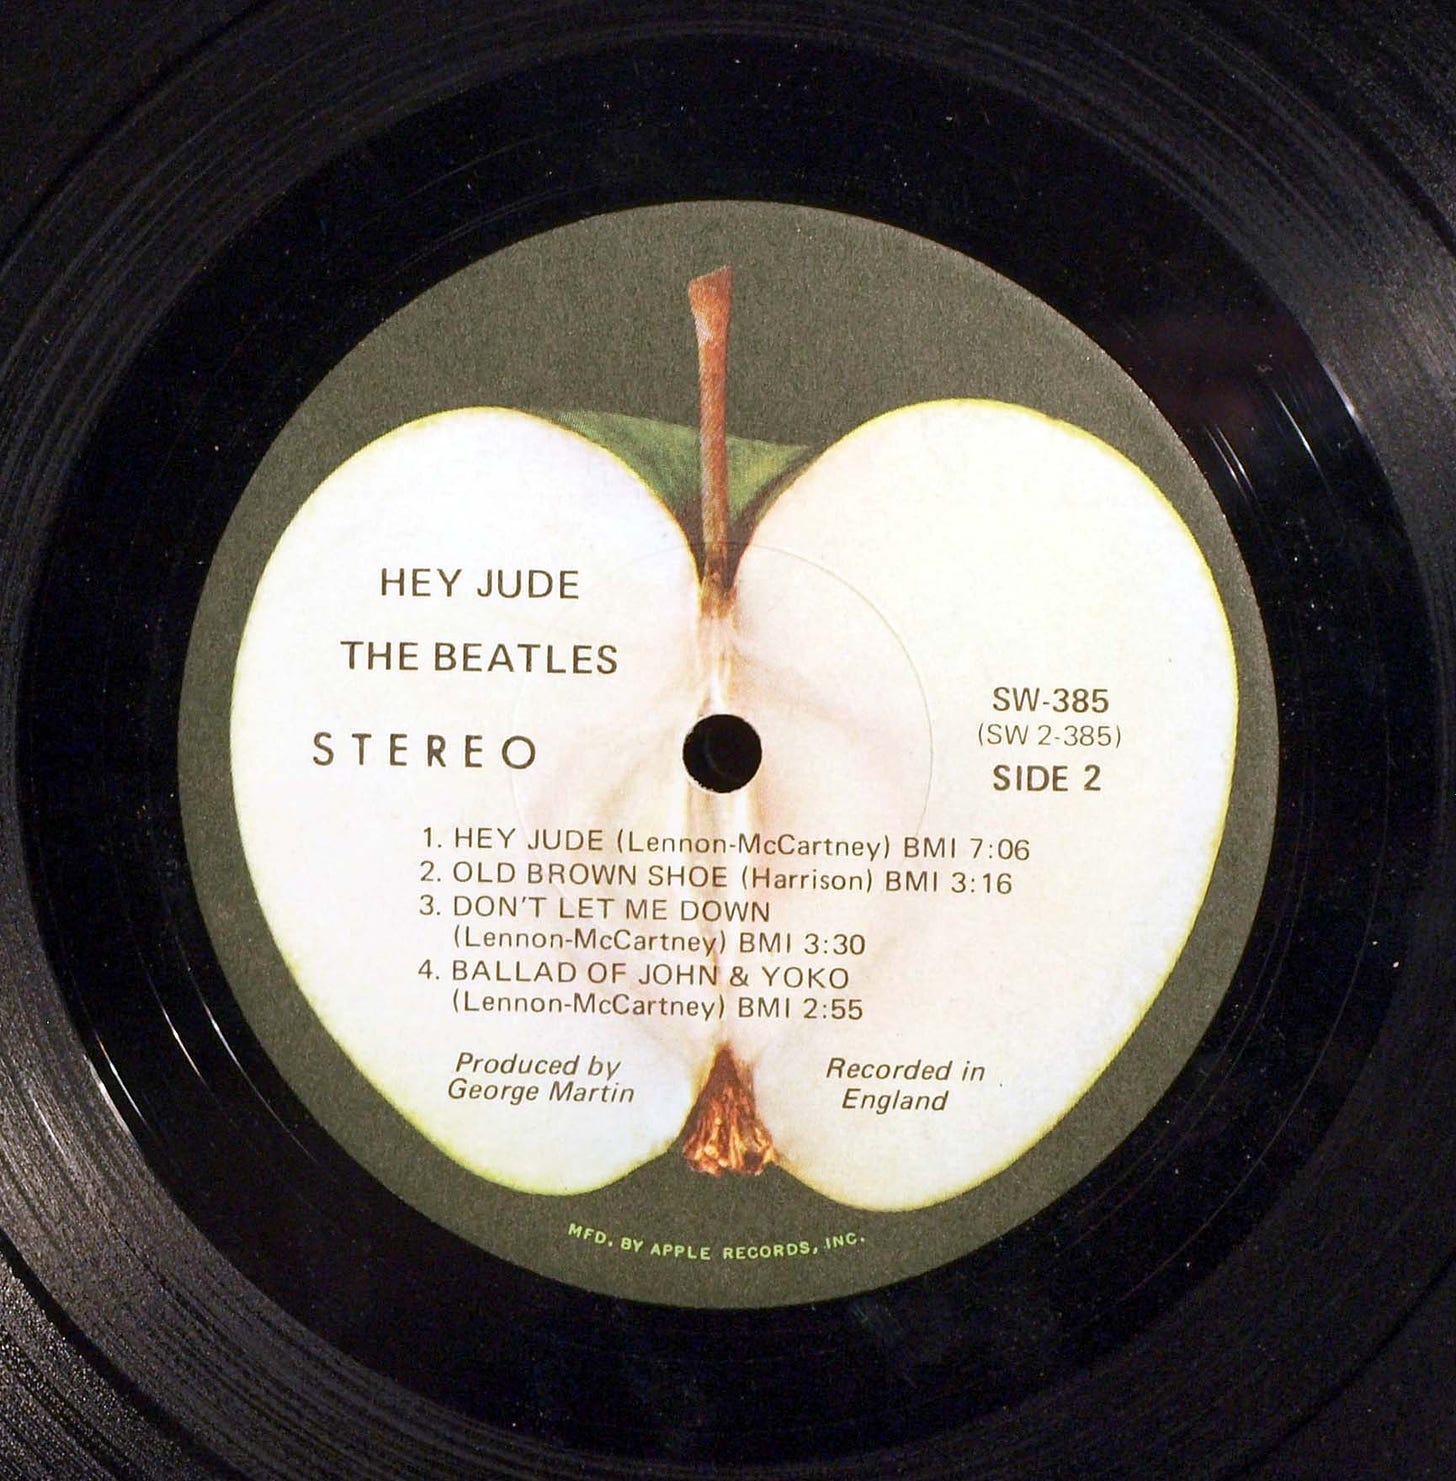 A close-up of a vinyl of Hey Jude by The Beatles